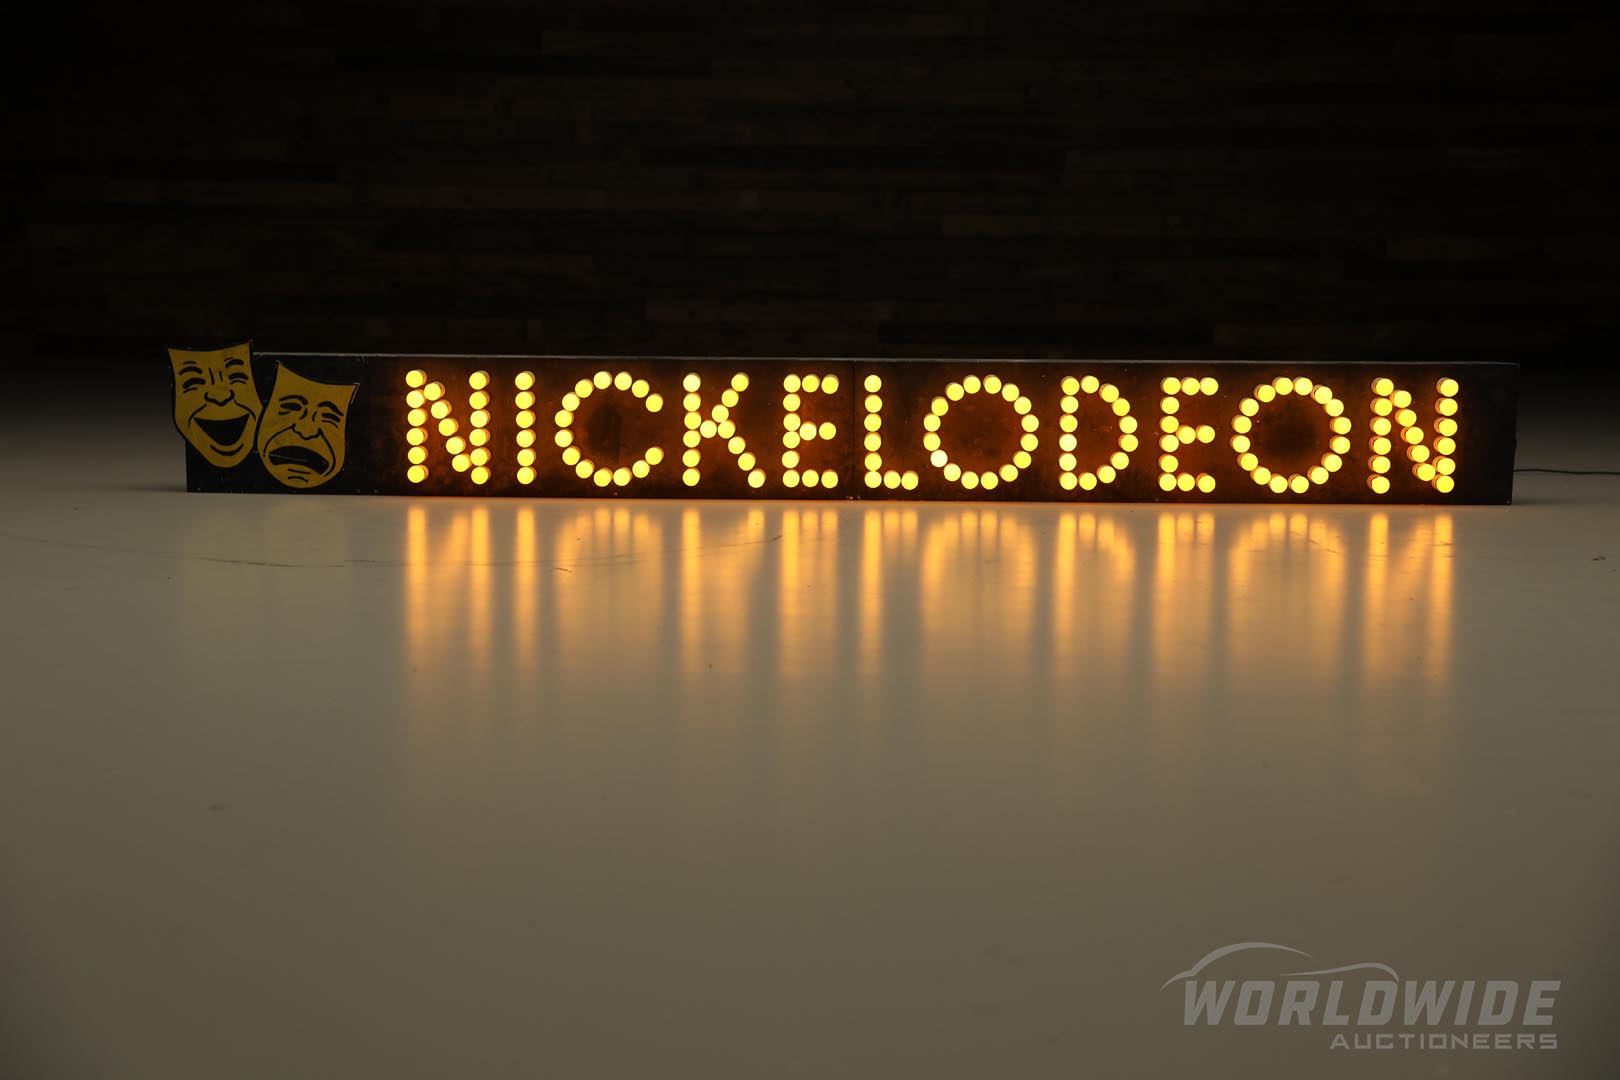 Large Nickelodeon Lighted Theatre Sign